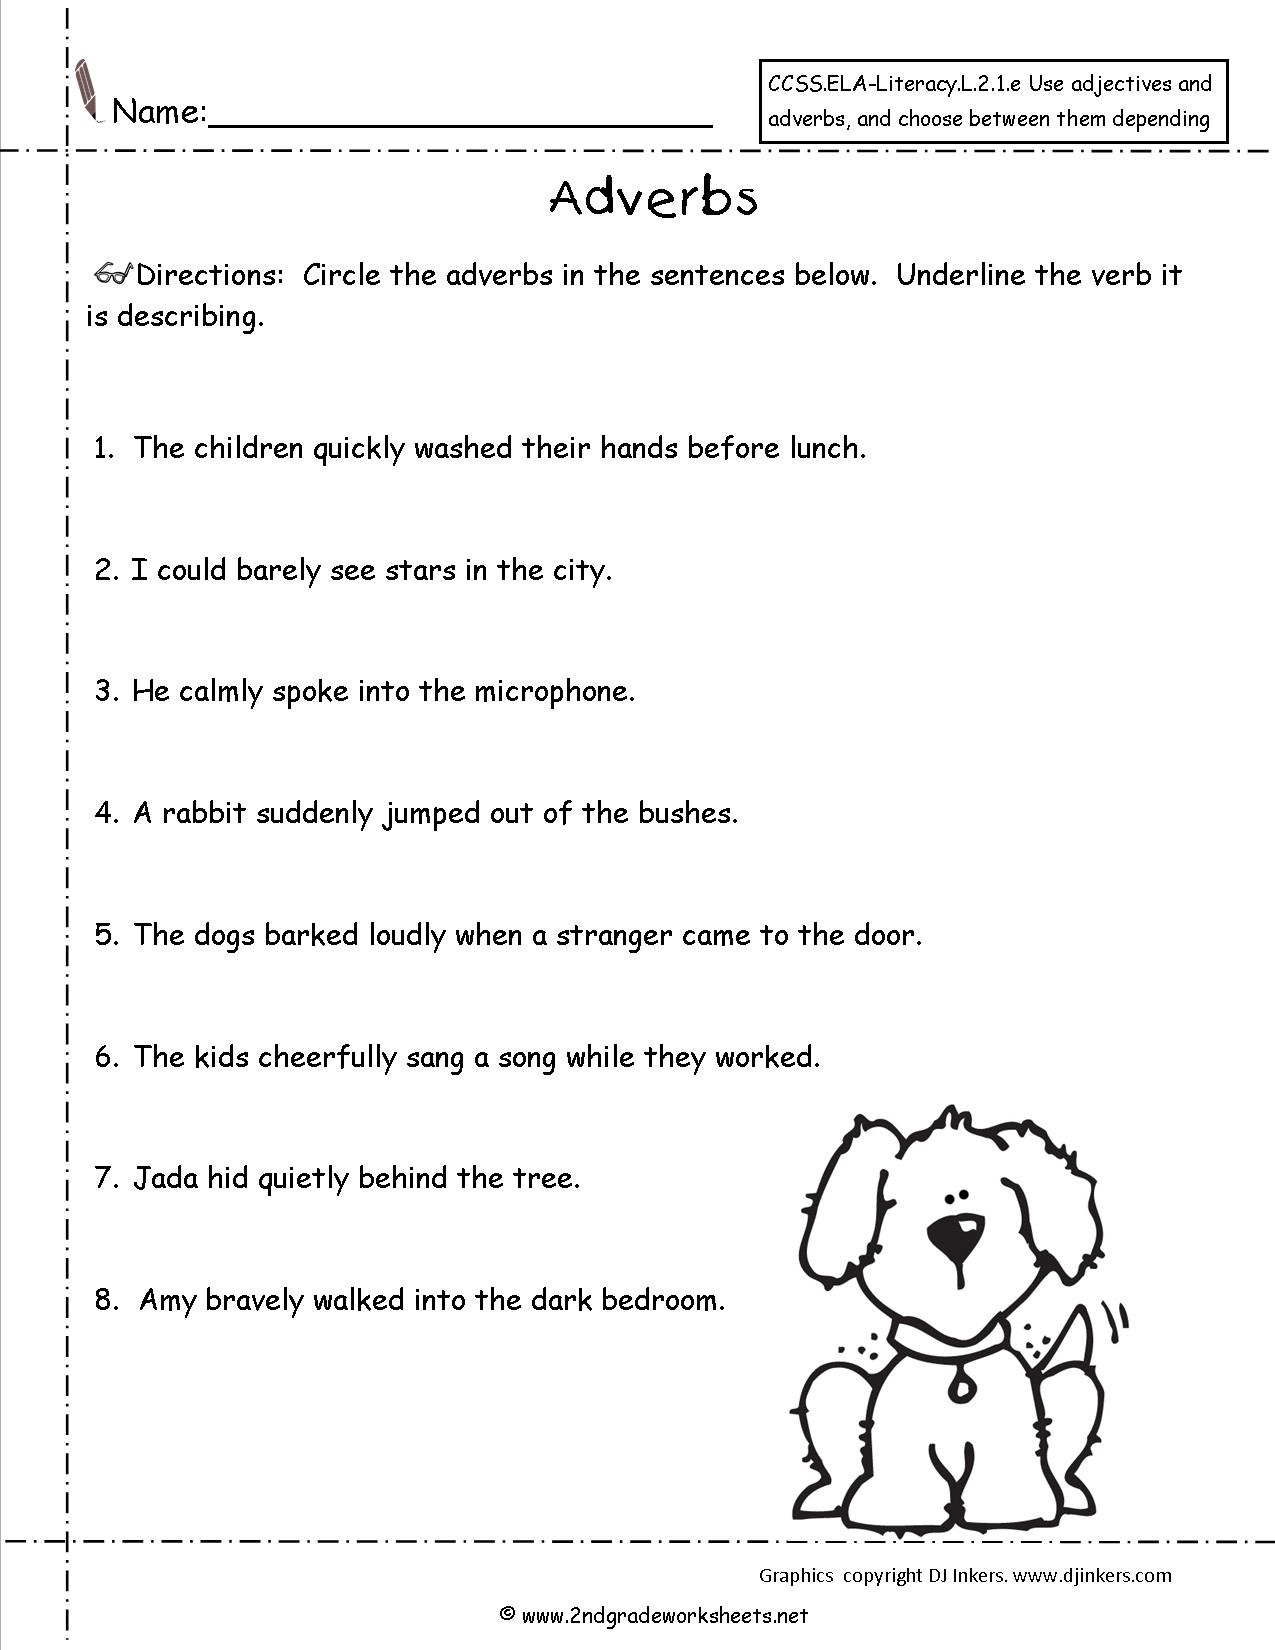 read-and-complete-story-time-with-adjectives-learn-english-words-adjectives-english